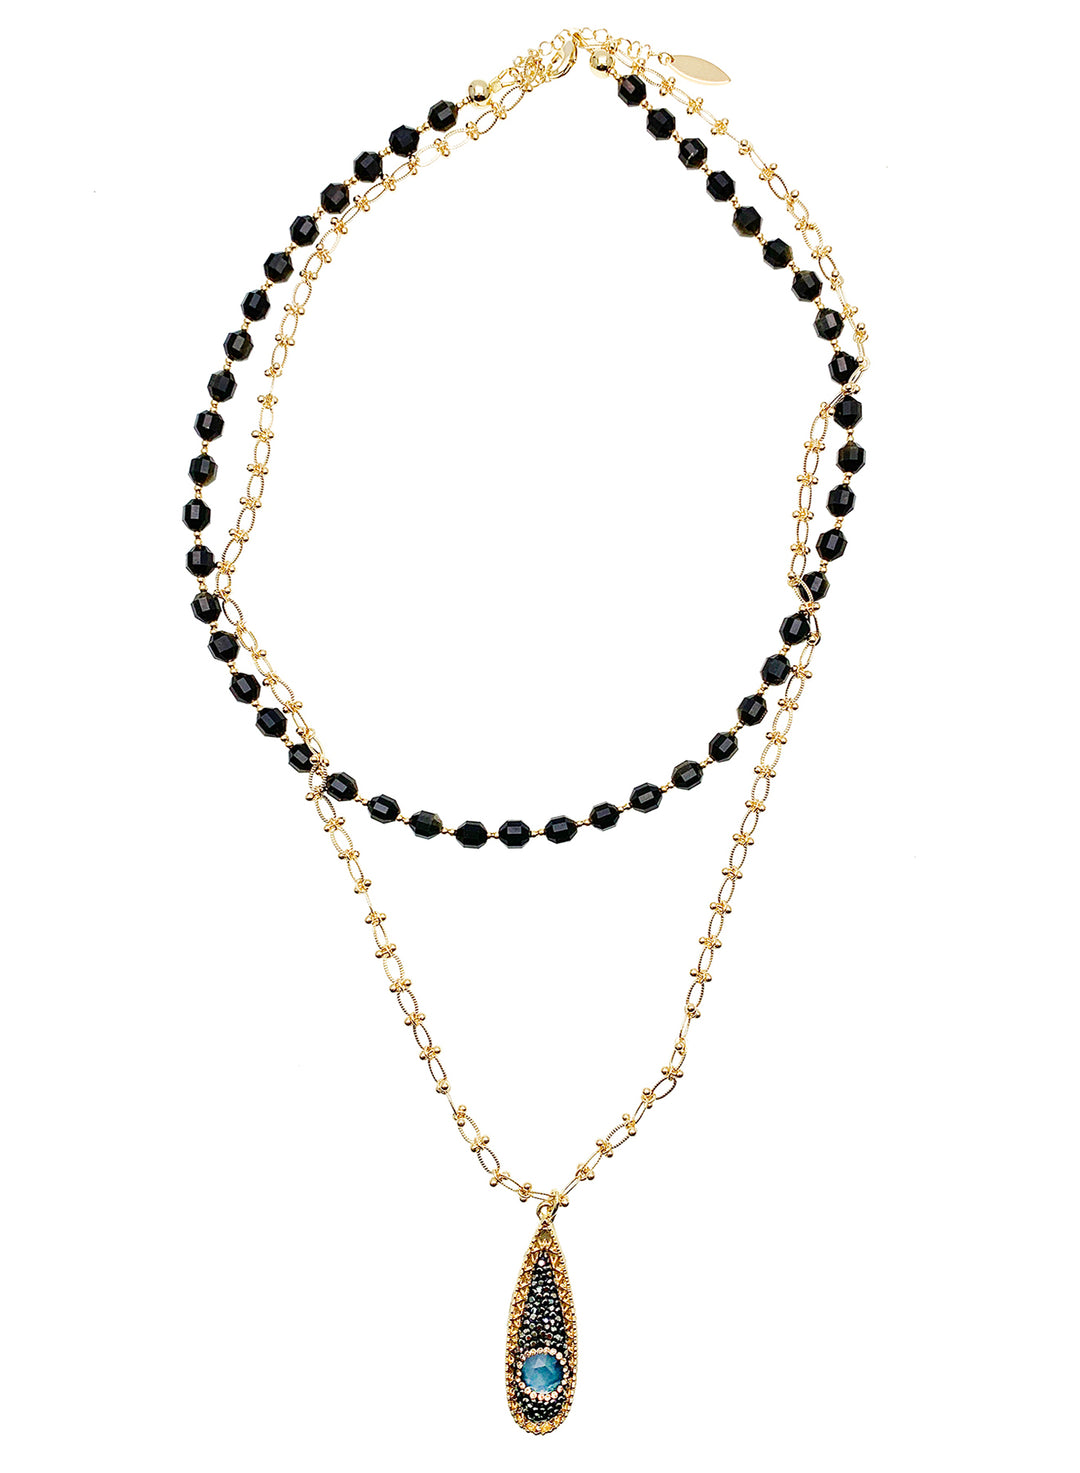 Black Obsidian and Chain With Pendant Double Layers Necklace HN036 - FARRA